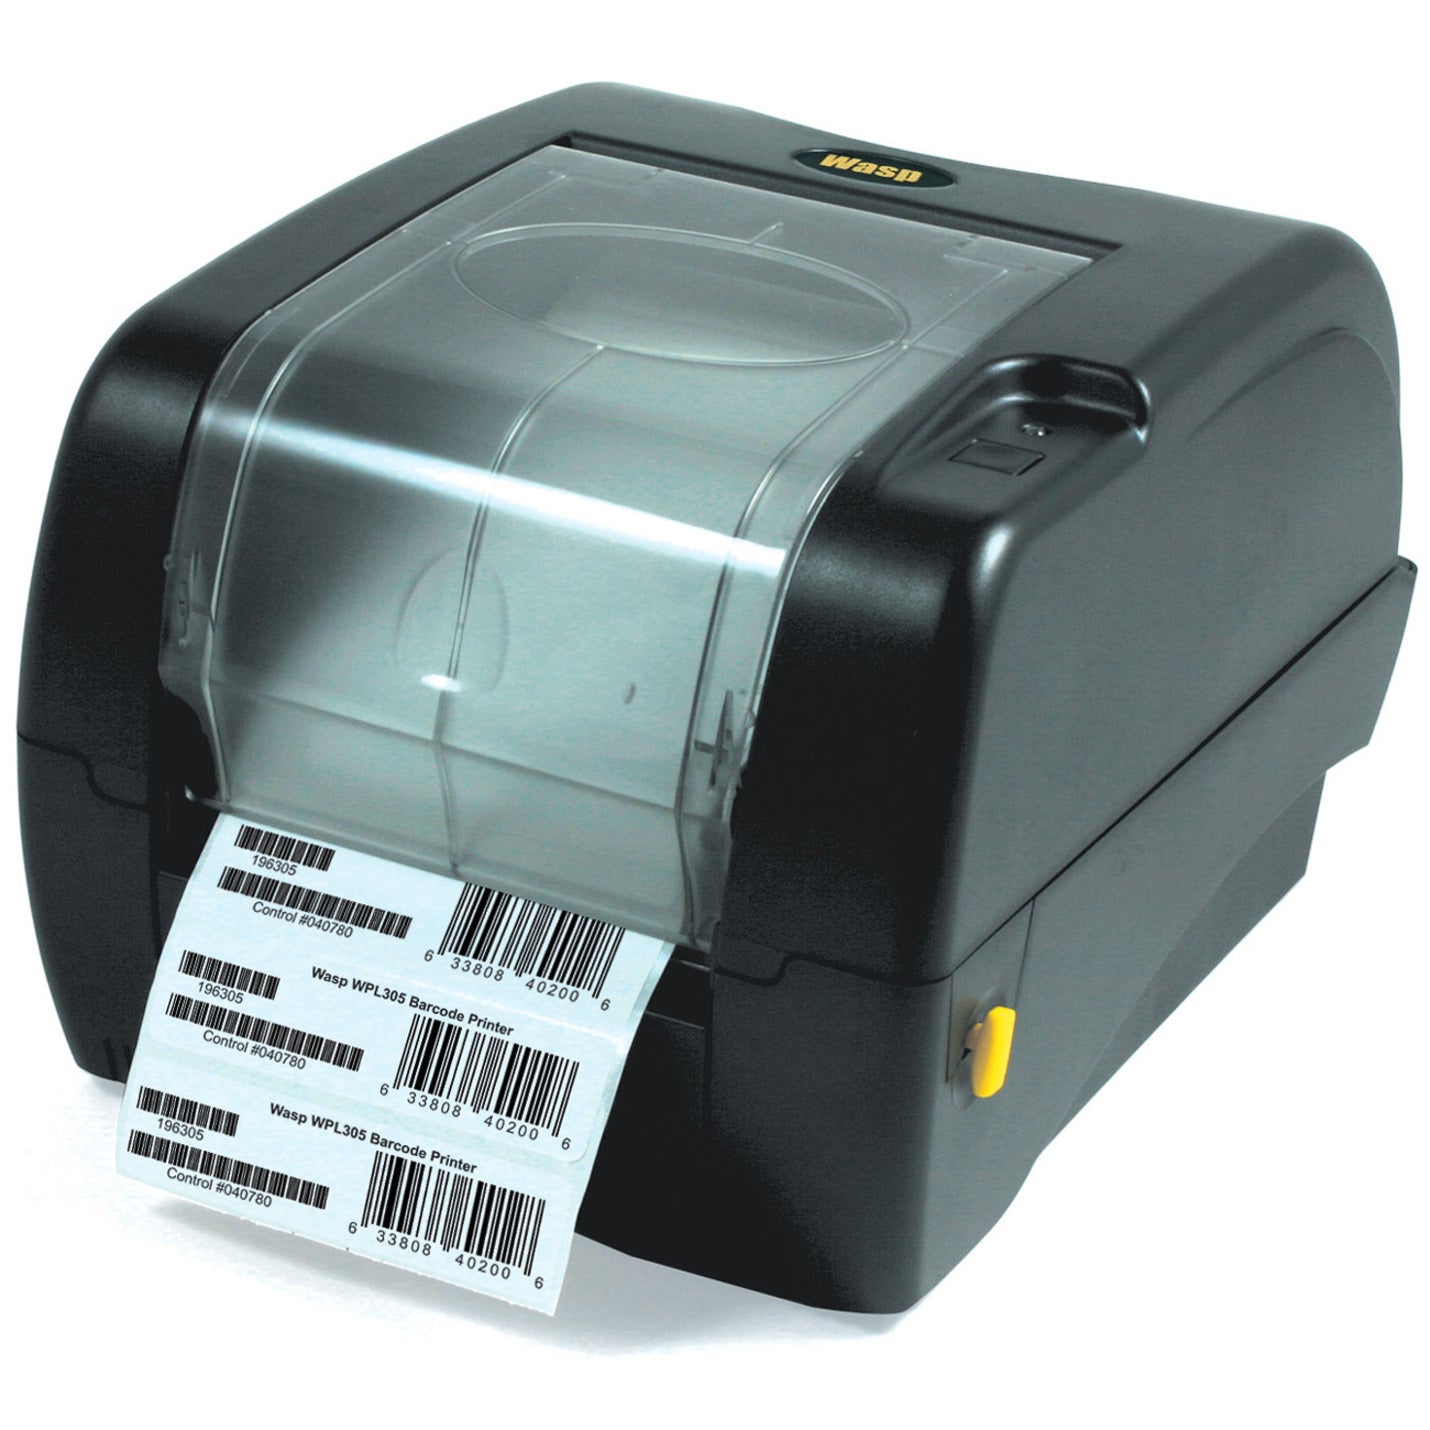 Wasp 633808402020 WPL305 Thermal Label Printer, Compact Design, Easy Media Supplies Loading